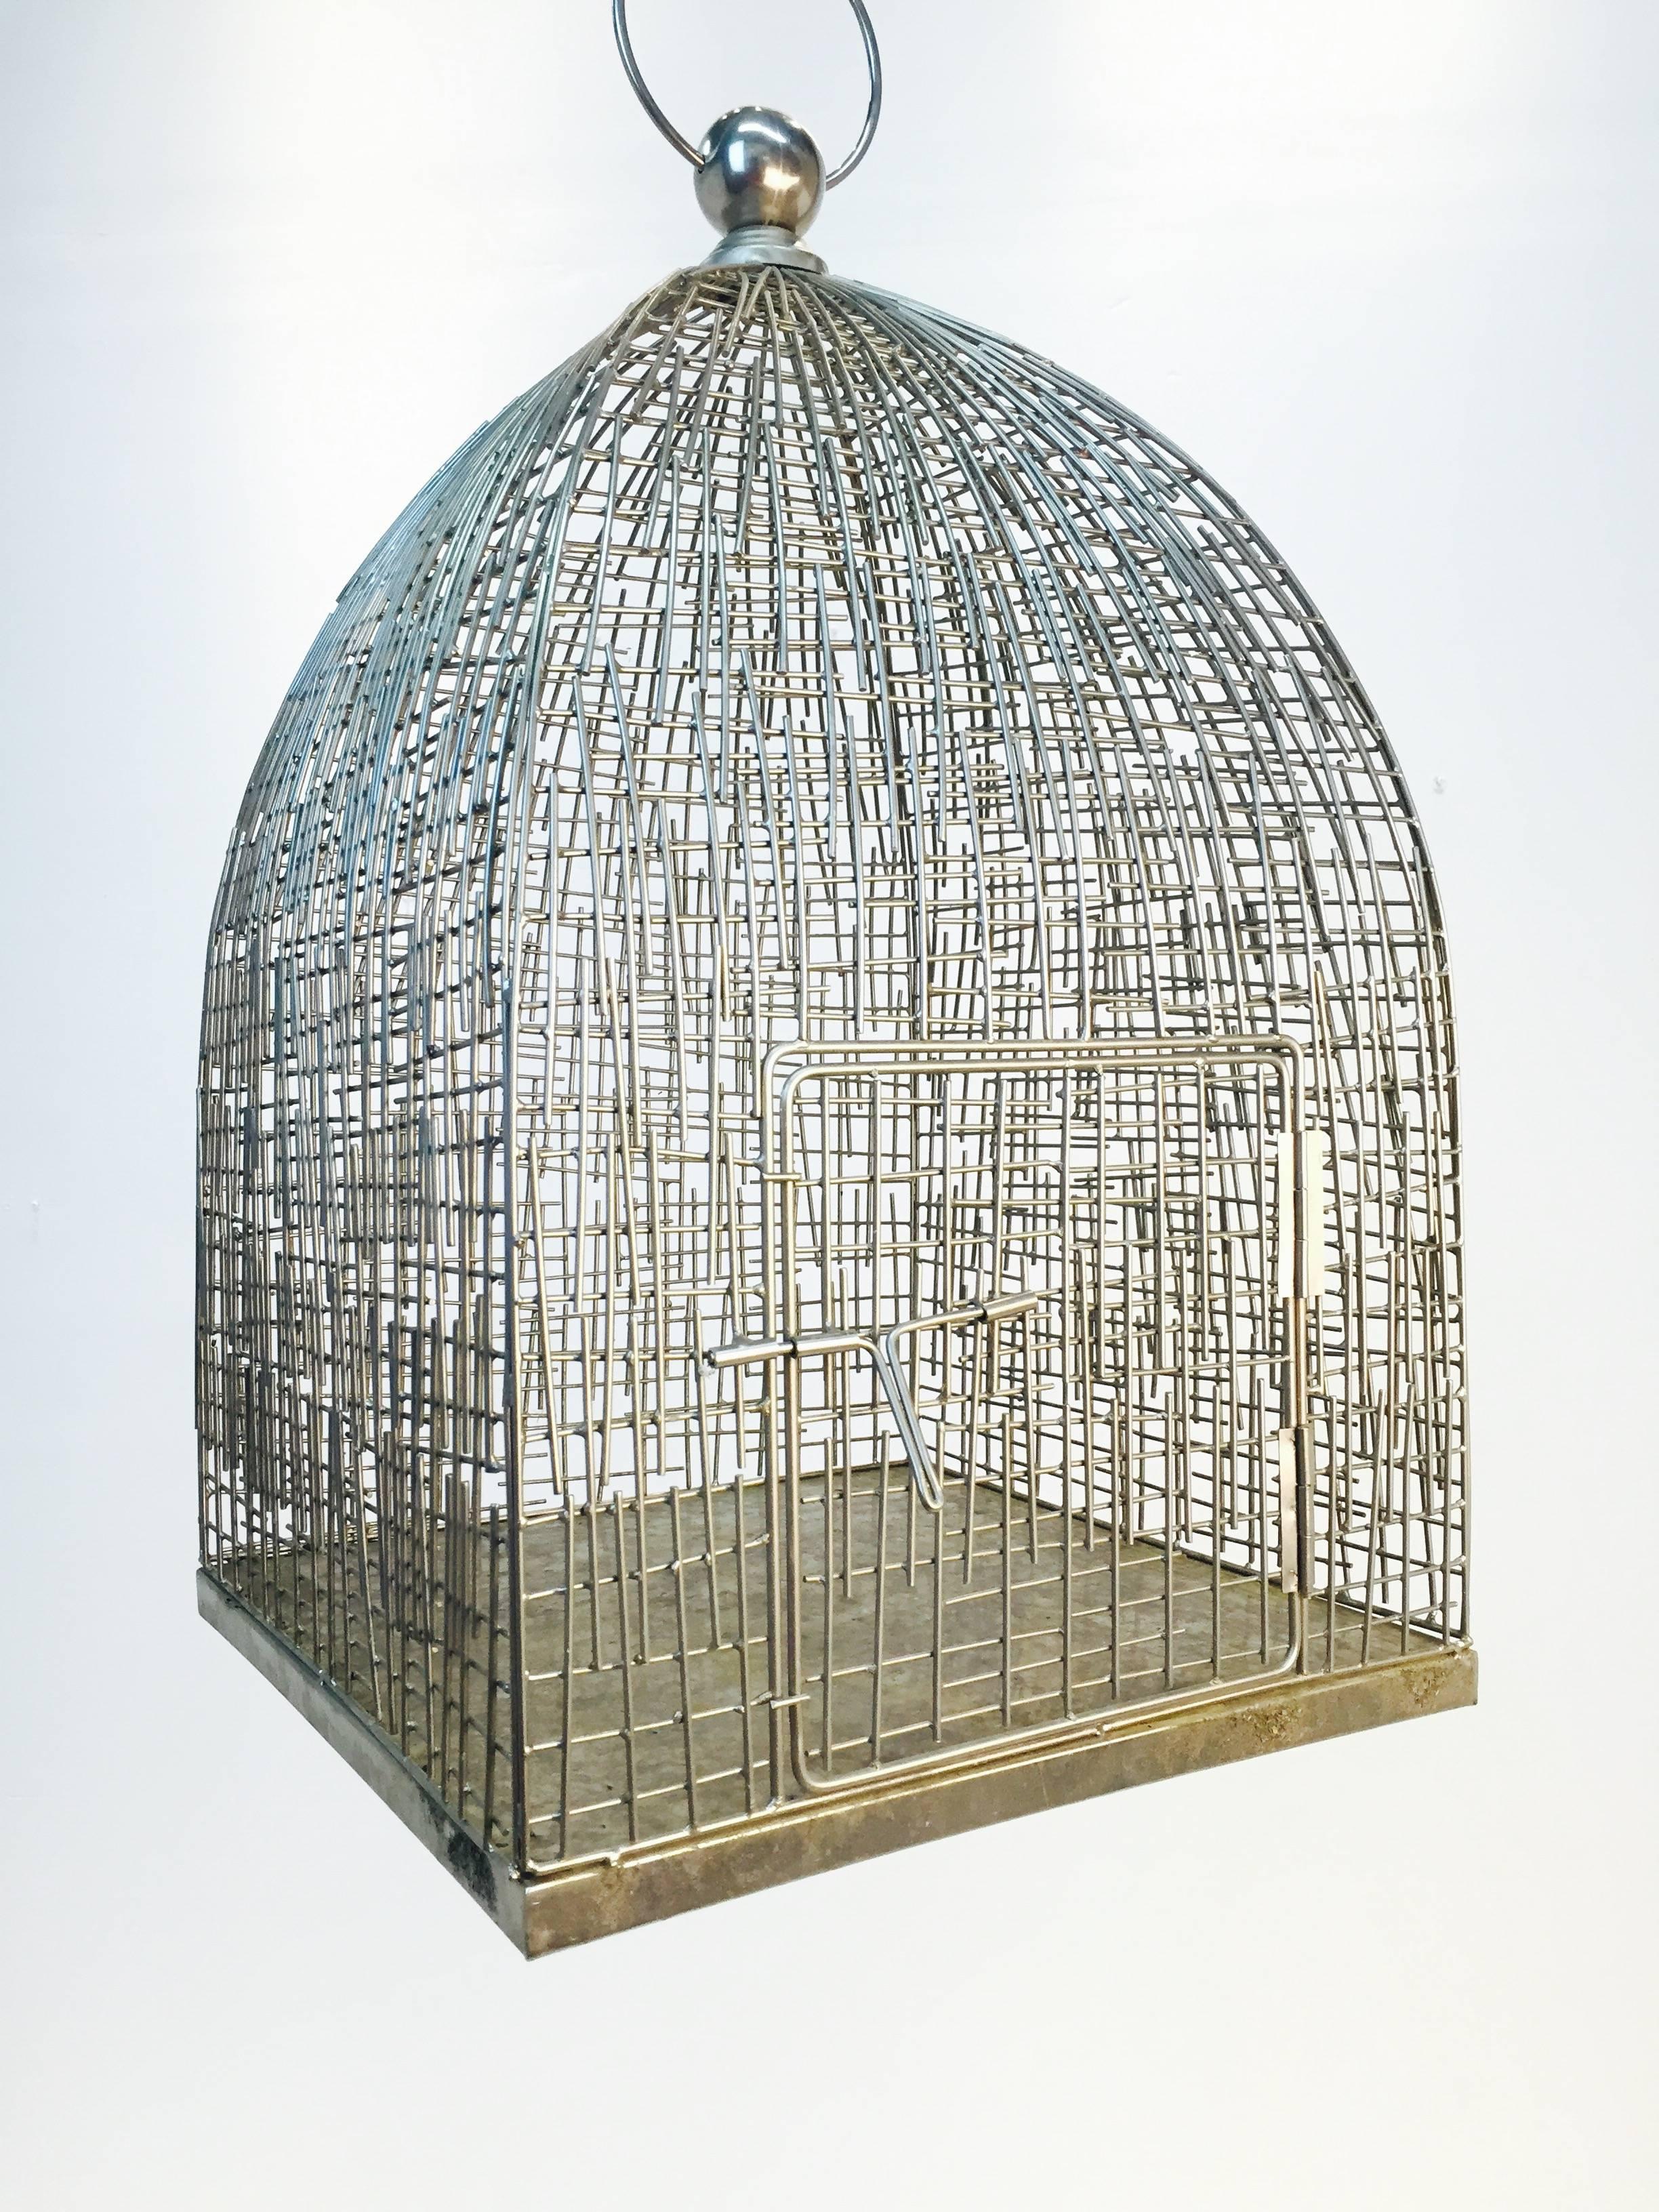 Large and elaborate metal bird cage, very sculptural.